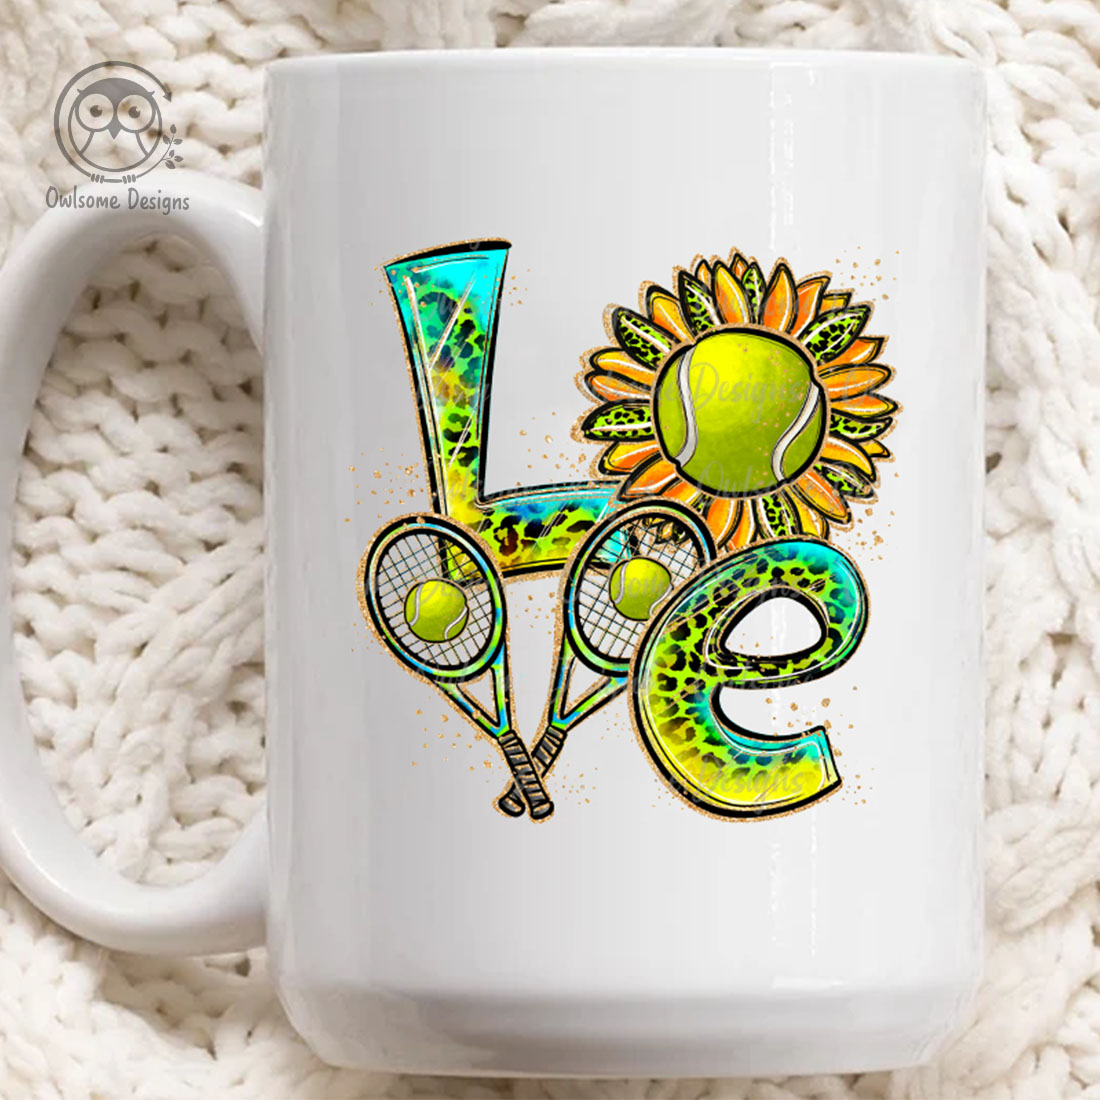 Image of a white cup with a colorful inscription Love with elements of tennis.